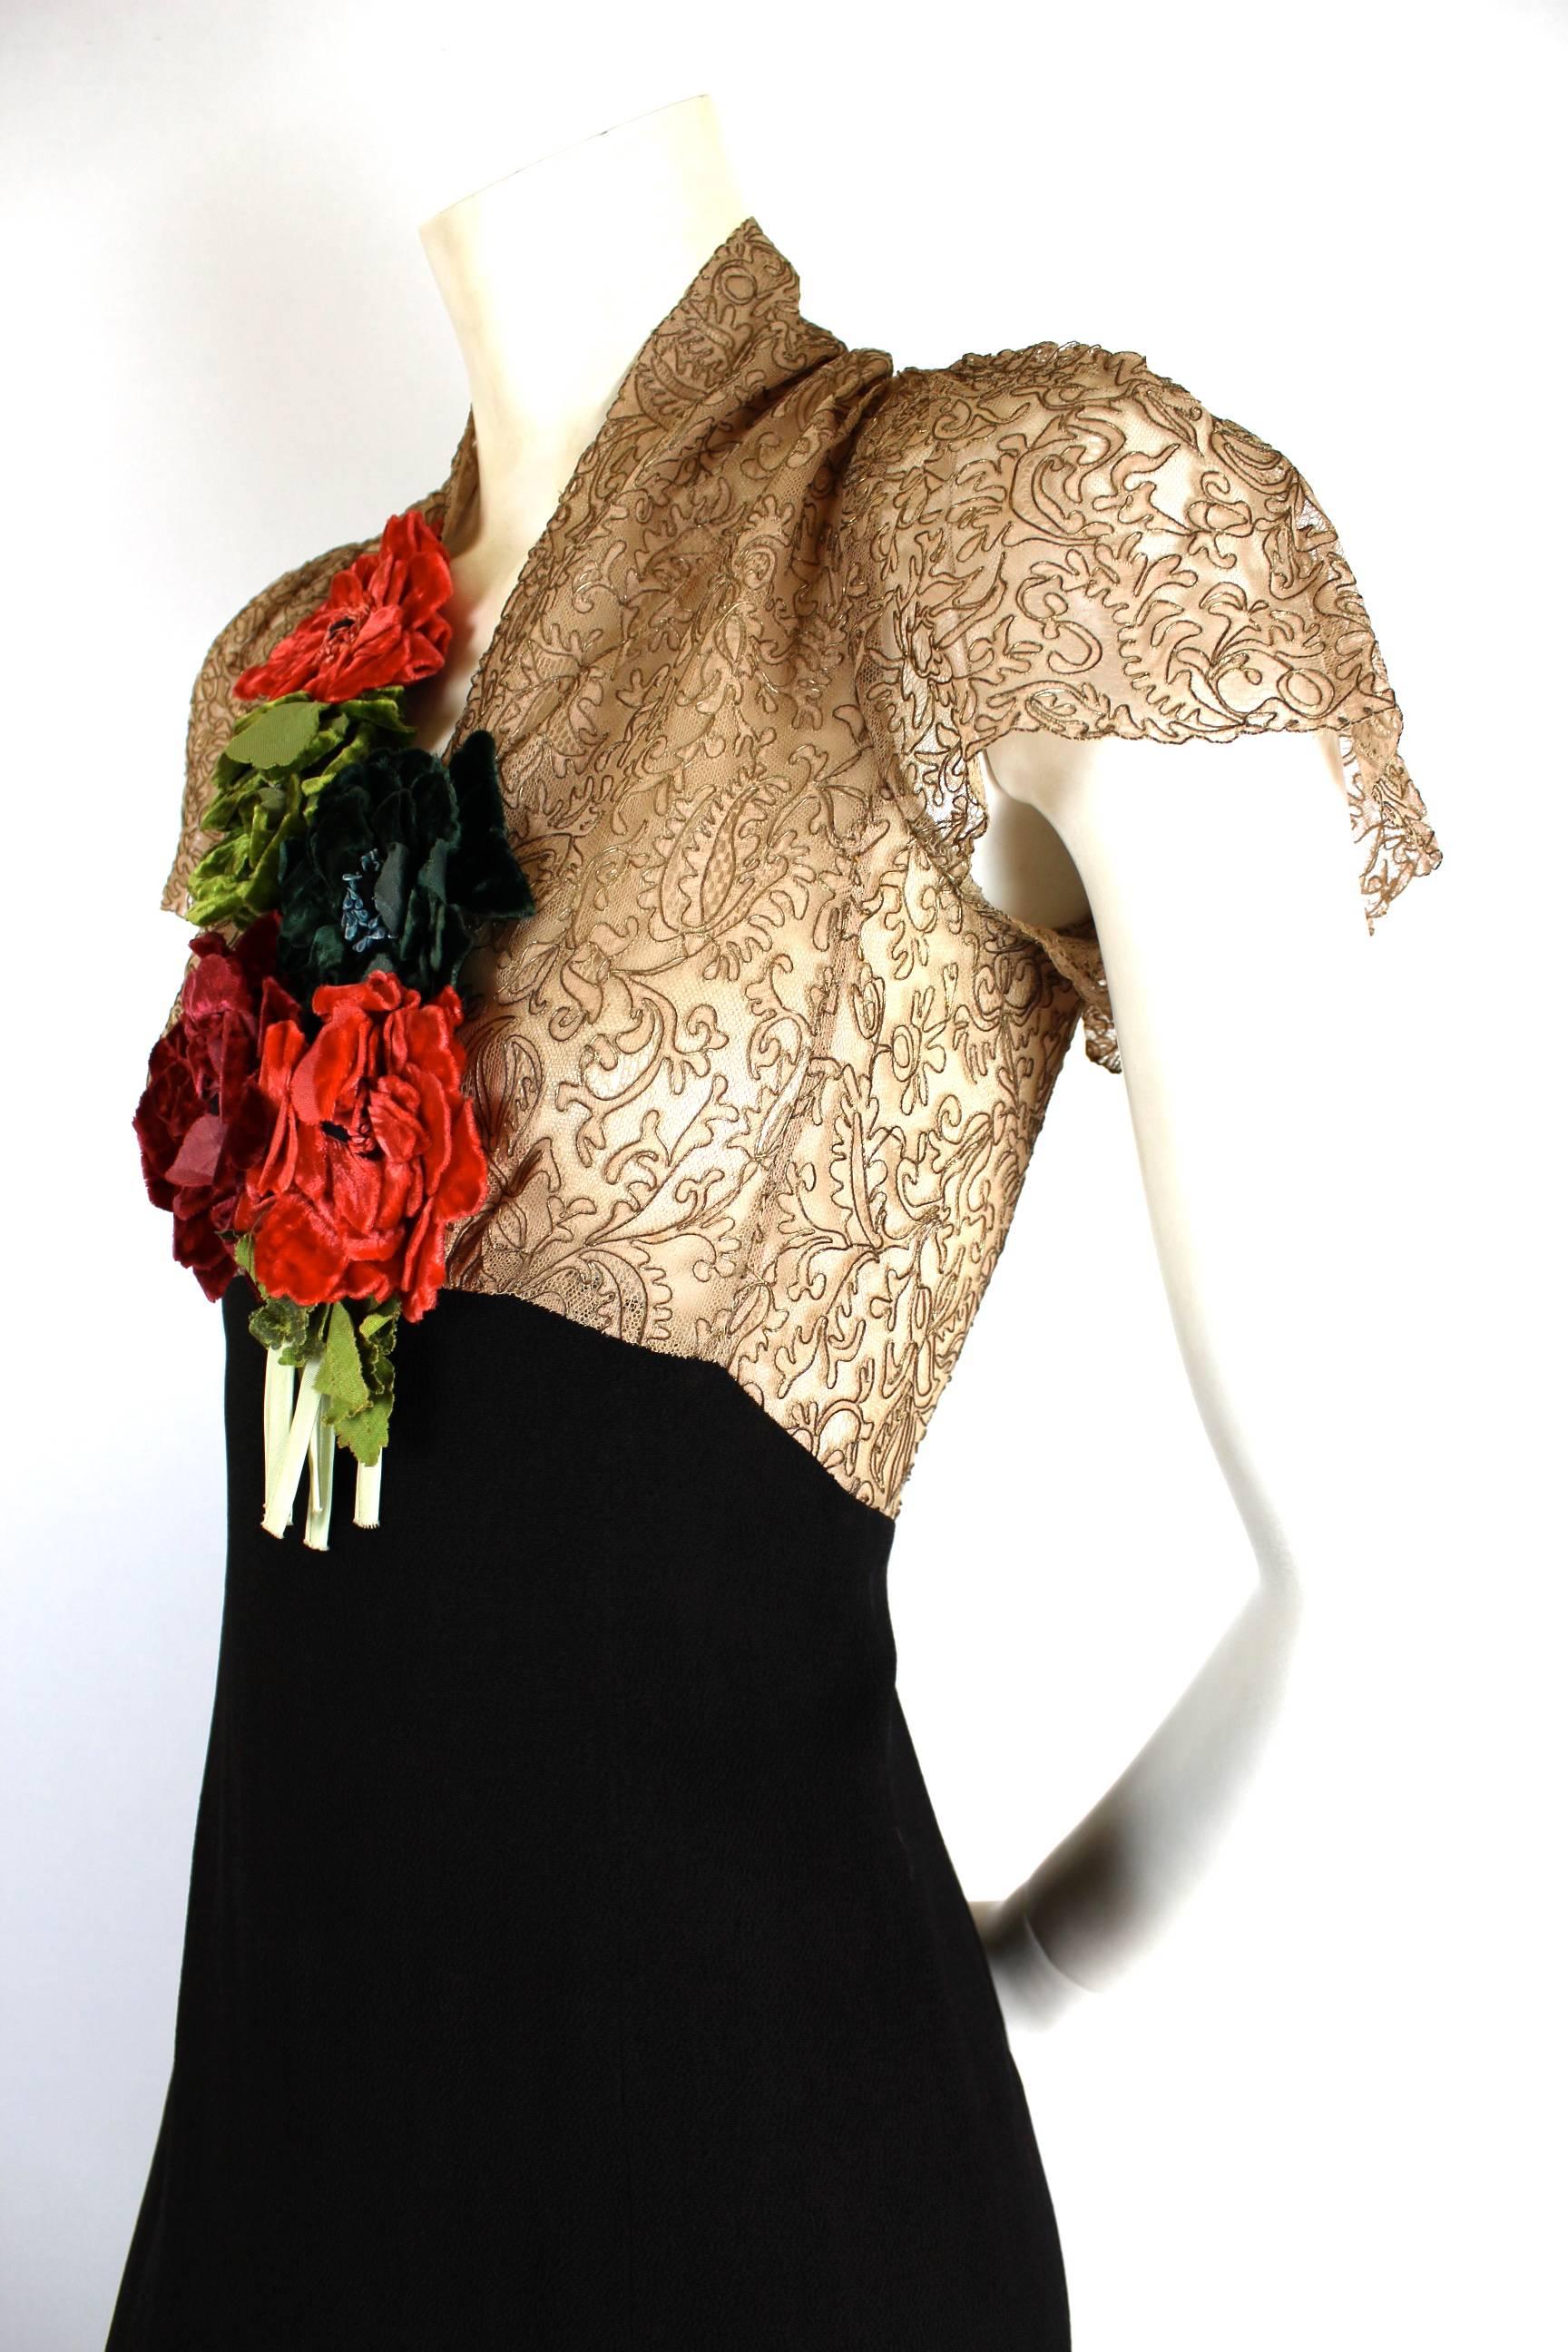 Women's 1930s/1940s Gold lace and Crepe Bacless Dress with Original Corsage